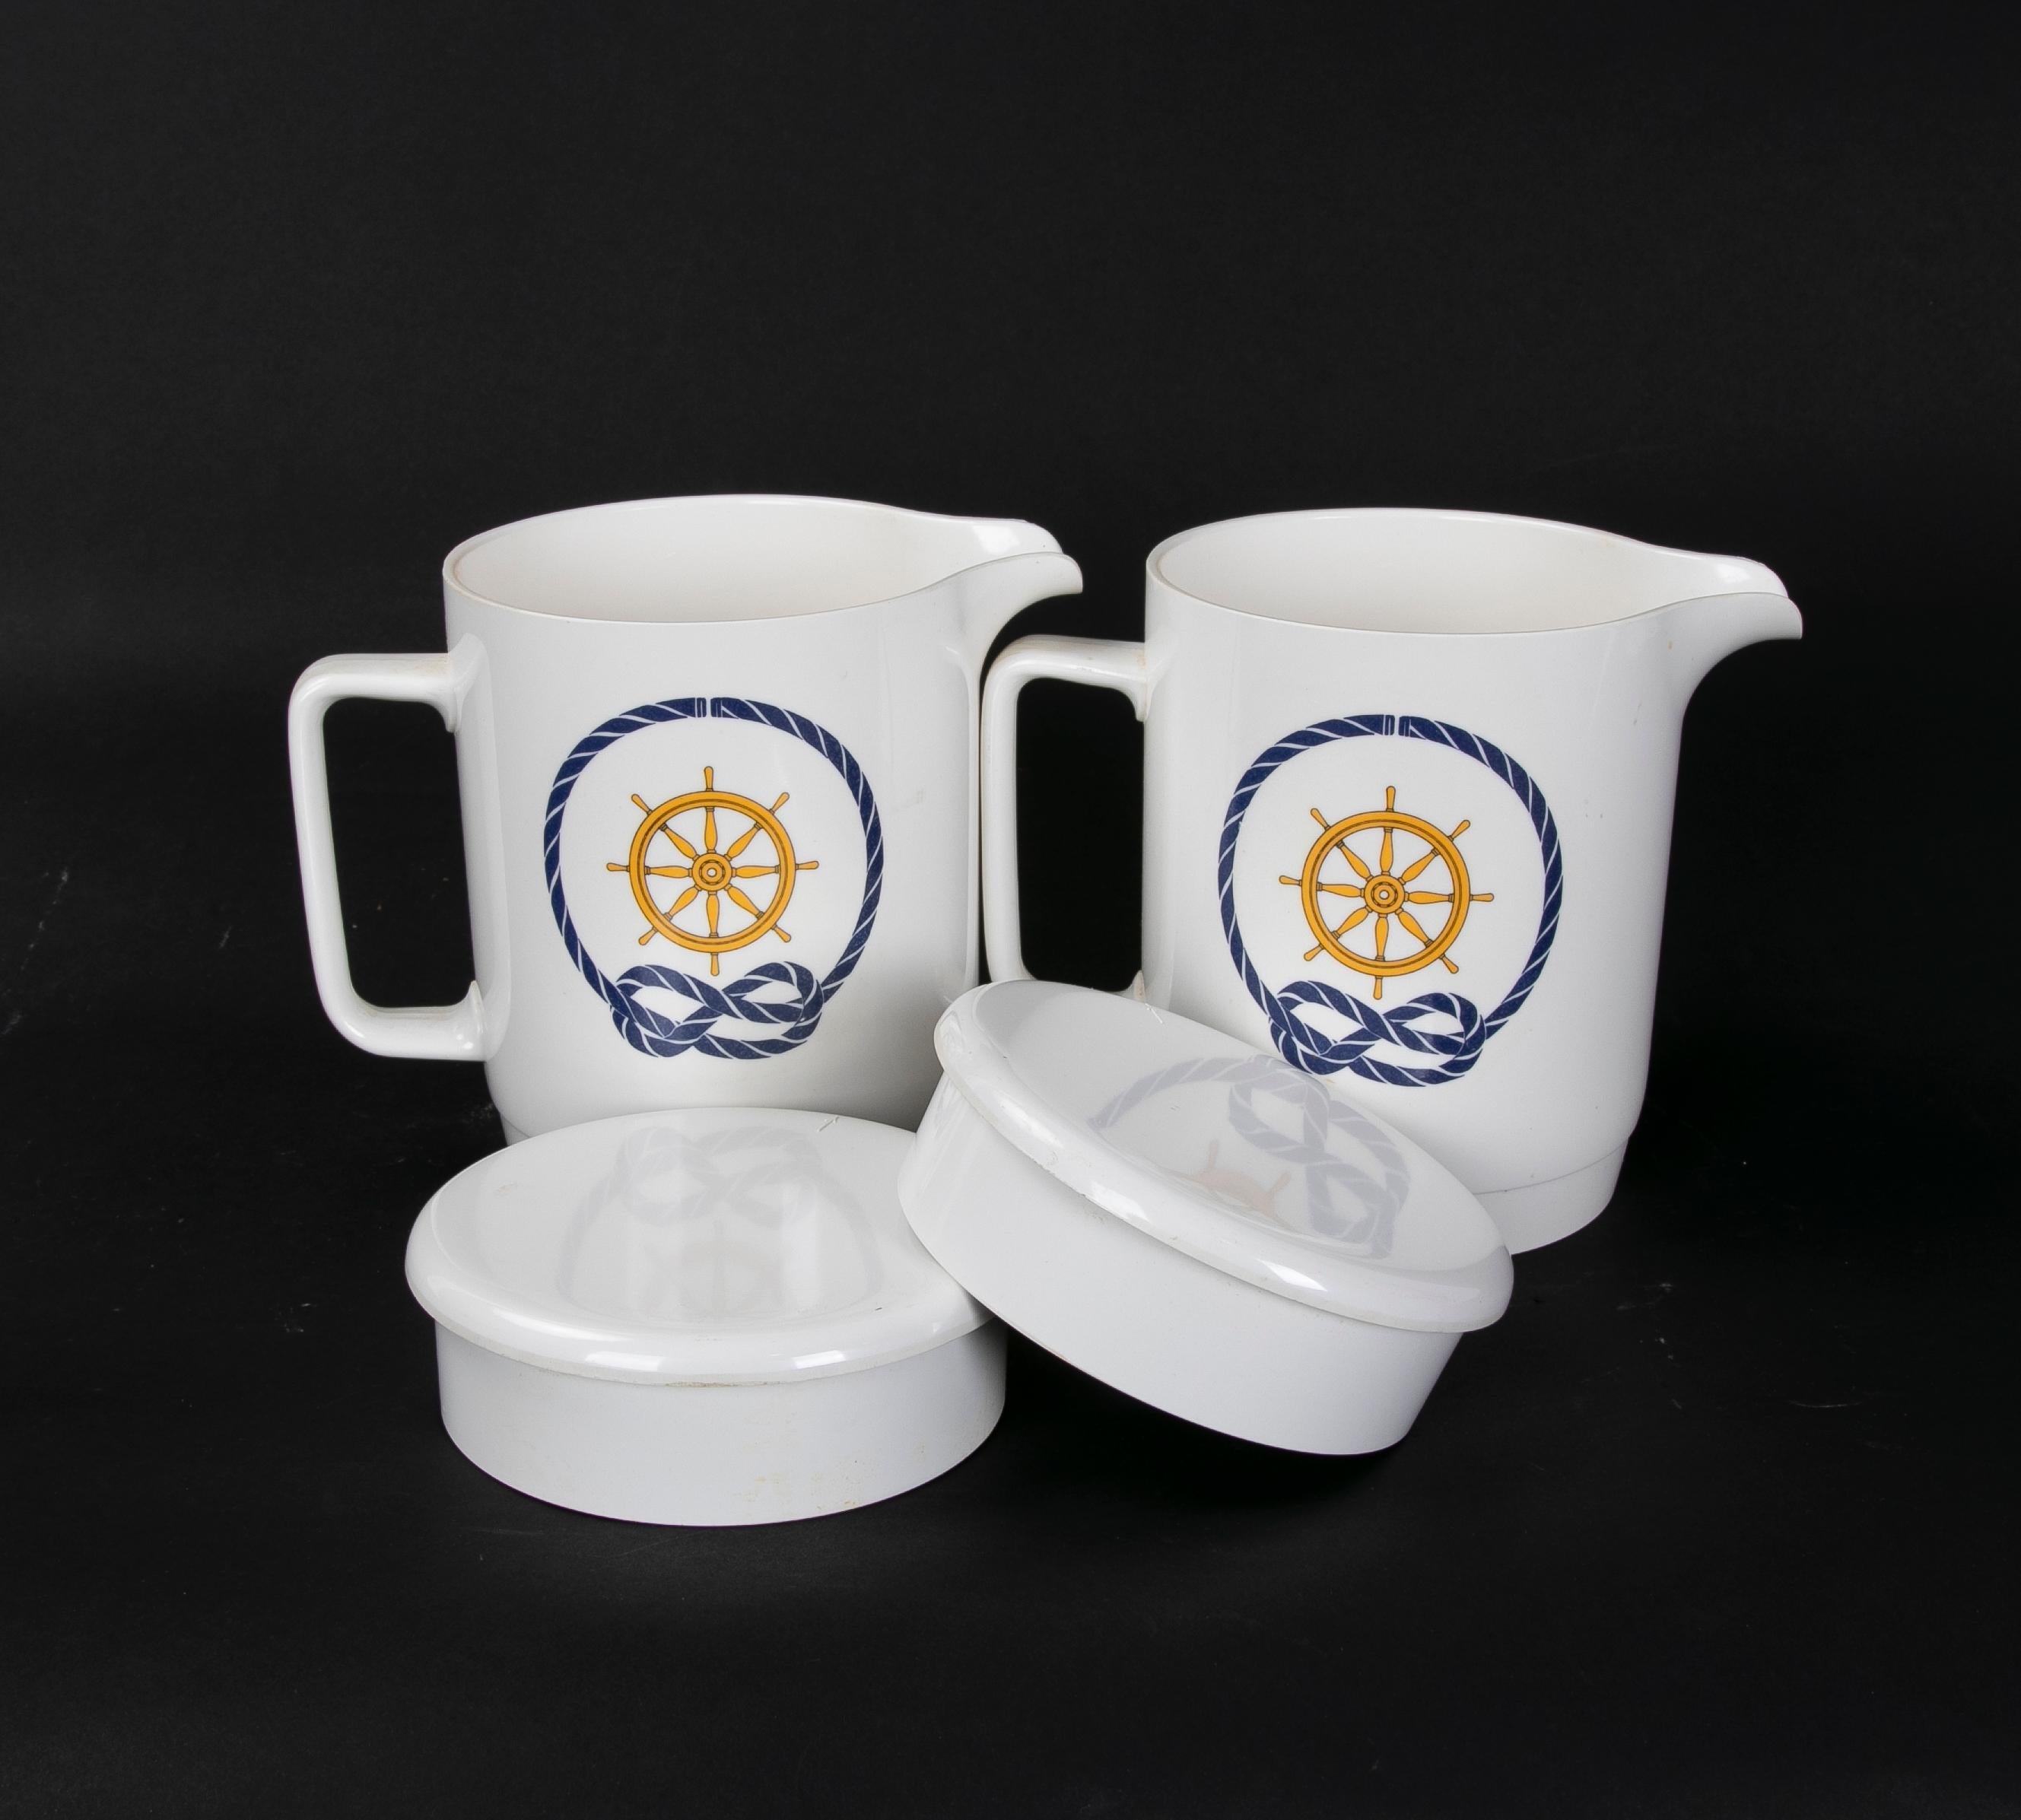 1980s Pair of boat mugs with sailor decoration design By A. Opel.